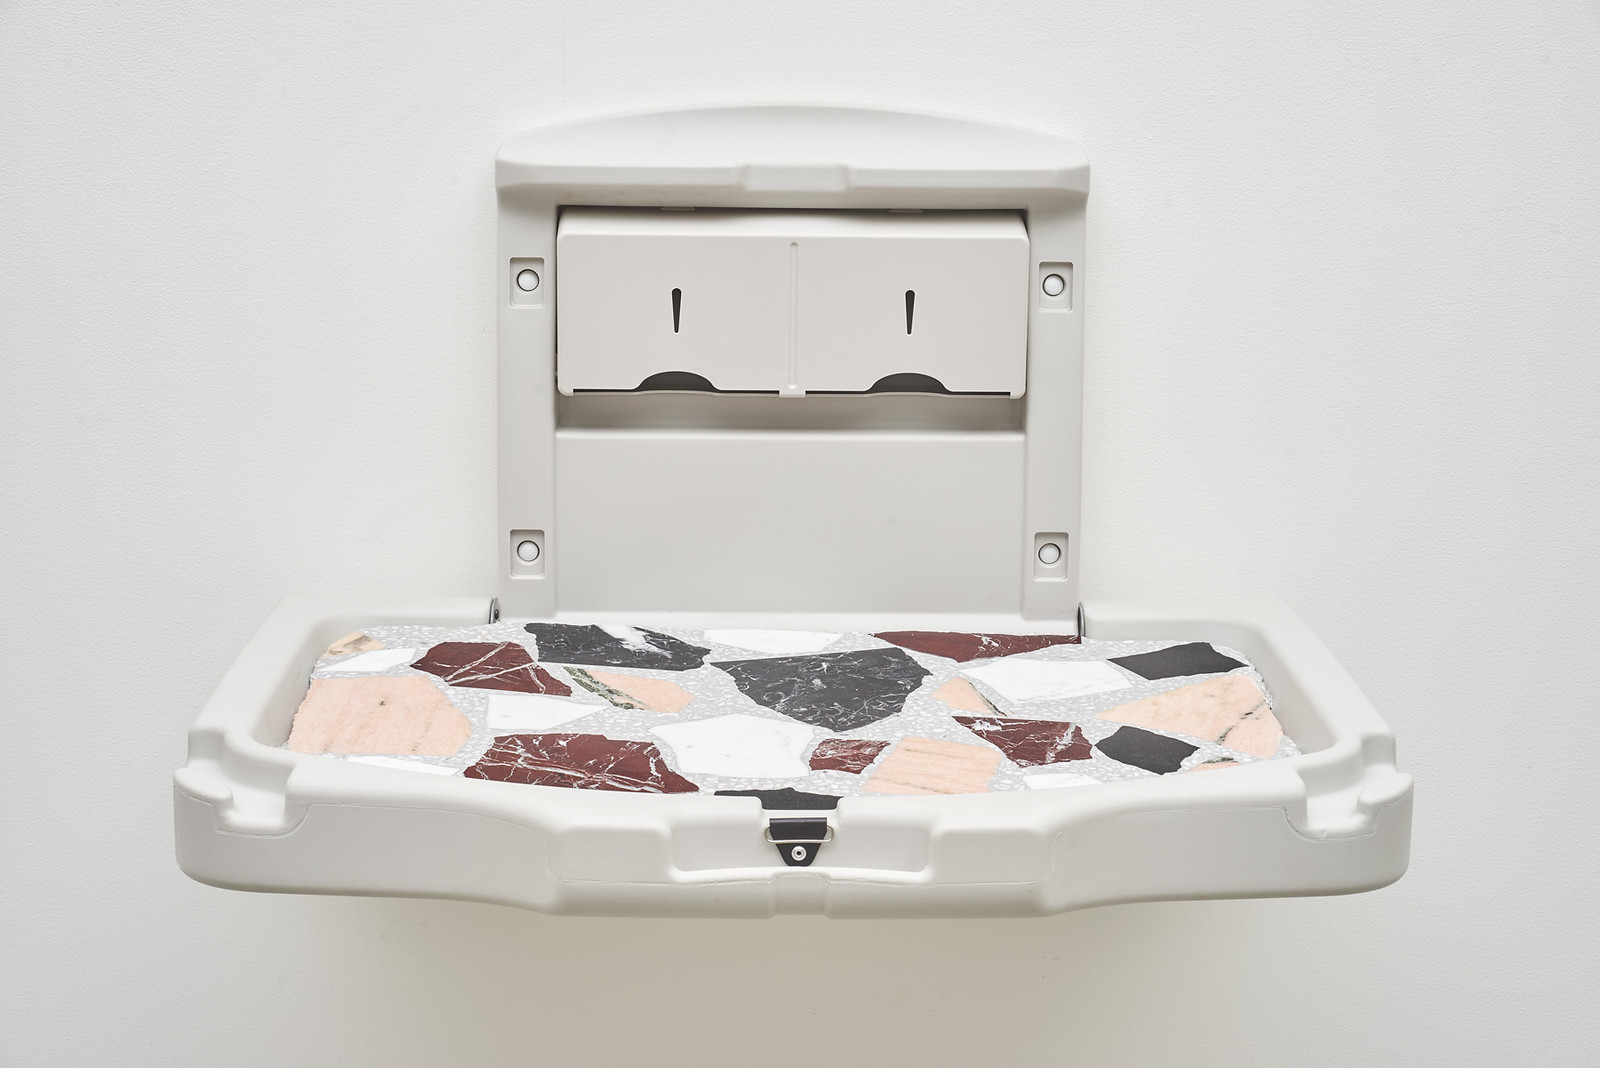 Wermers_Moodboard #5, 2016_Cast terrazzo in baby changing unit_20 x 33.75 x 22.375 in_NW00040ST